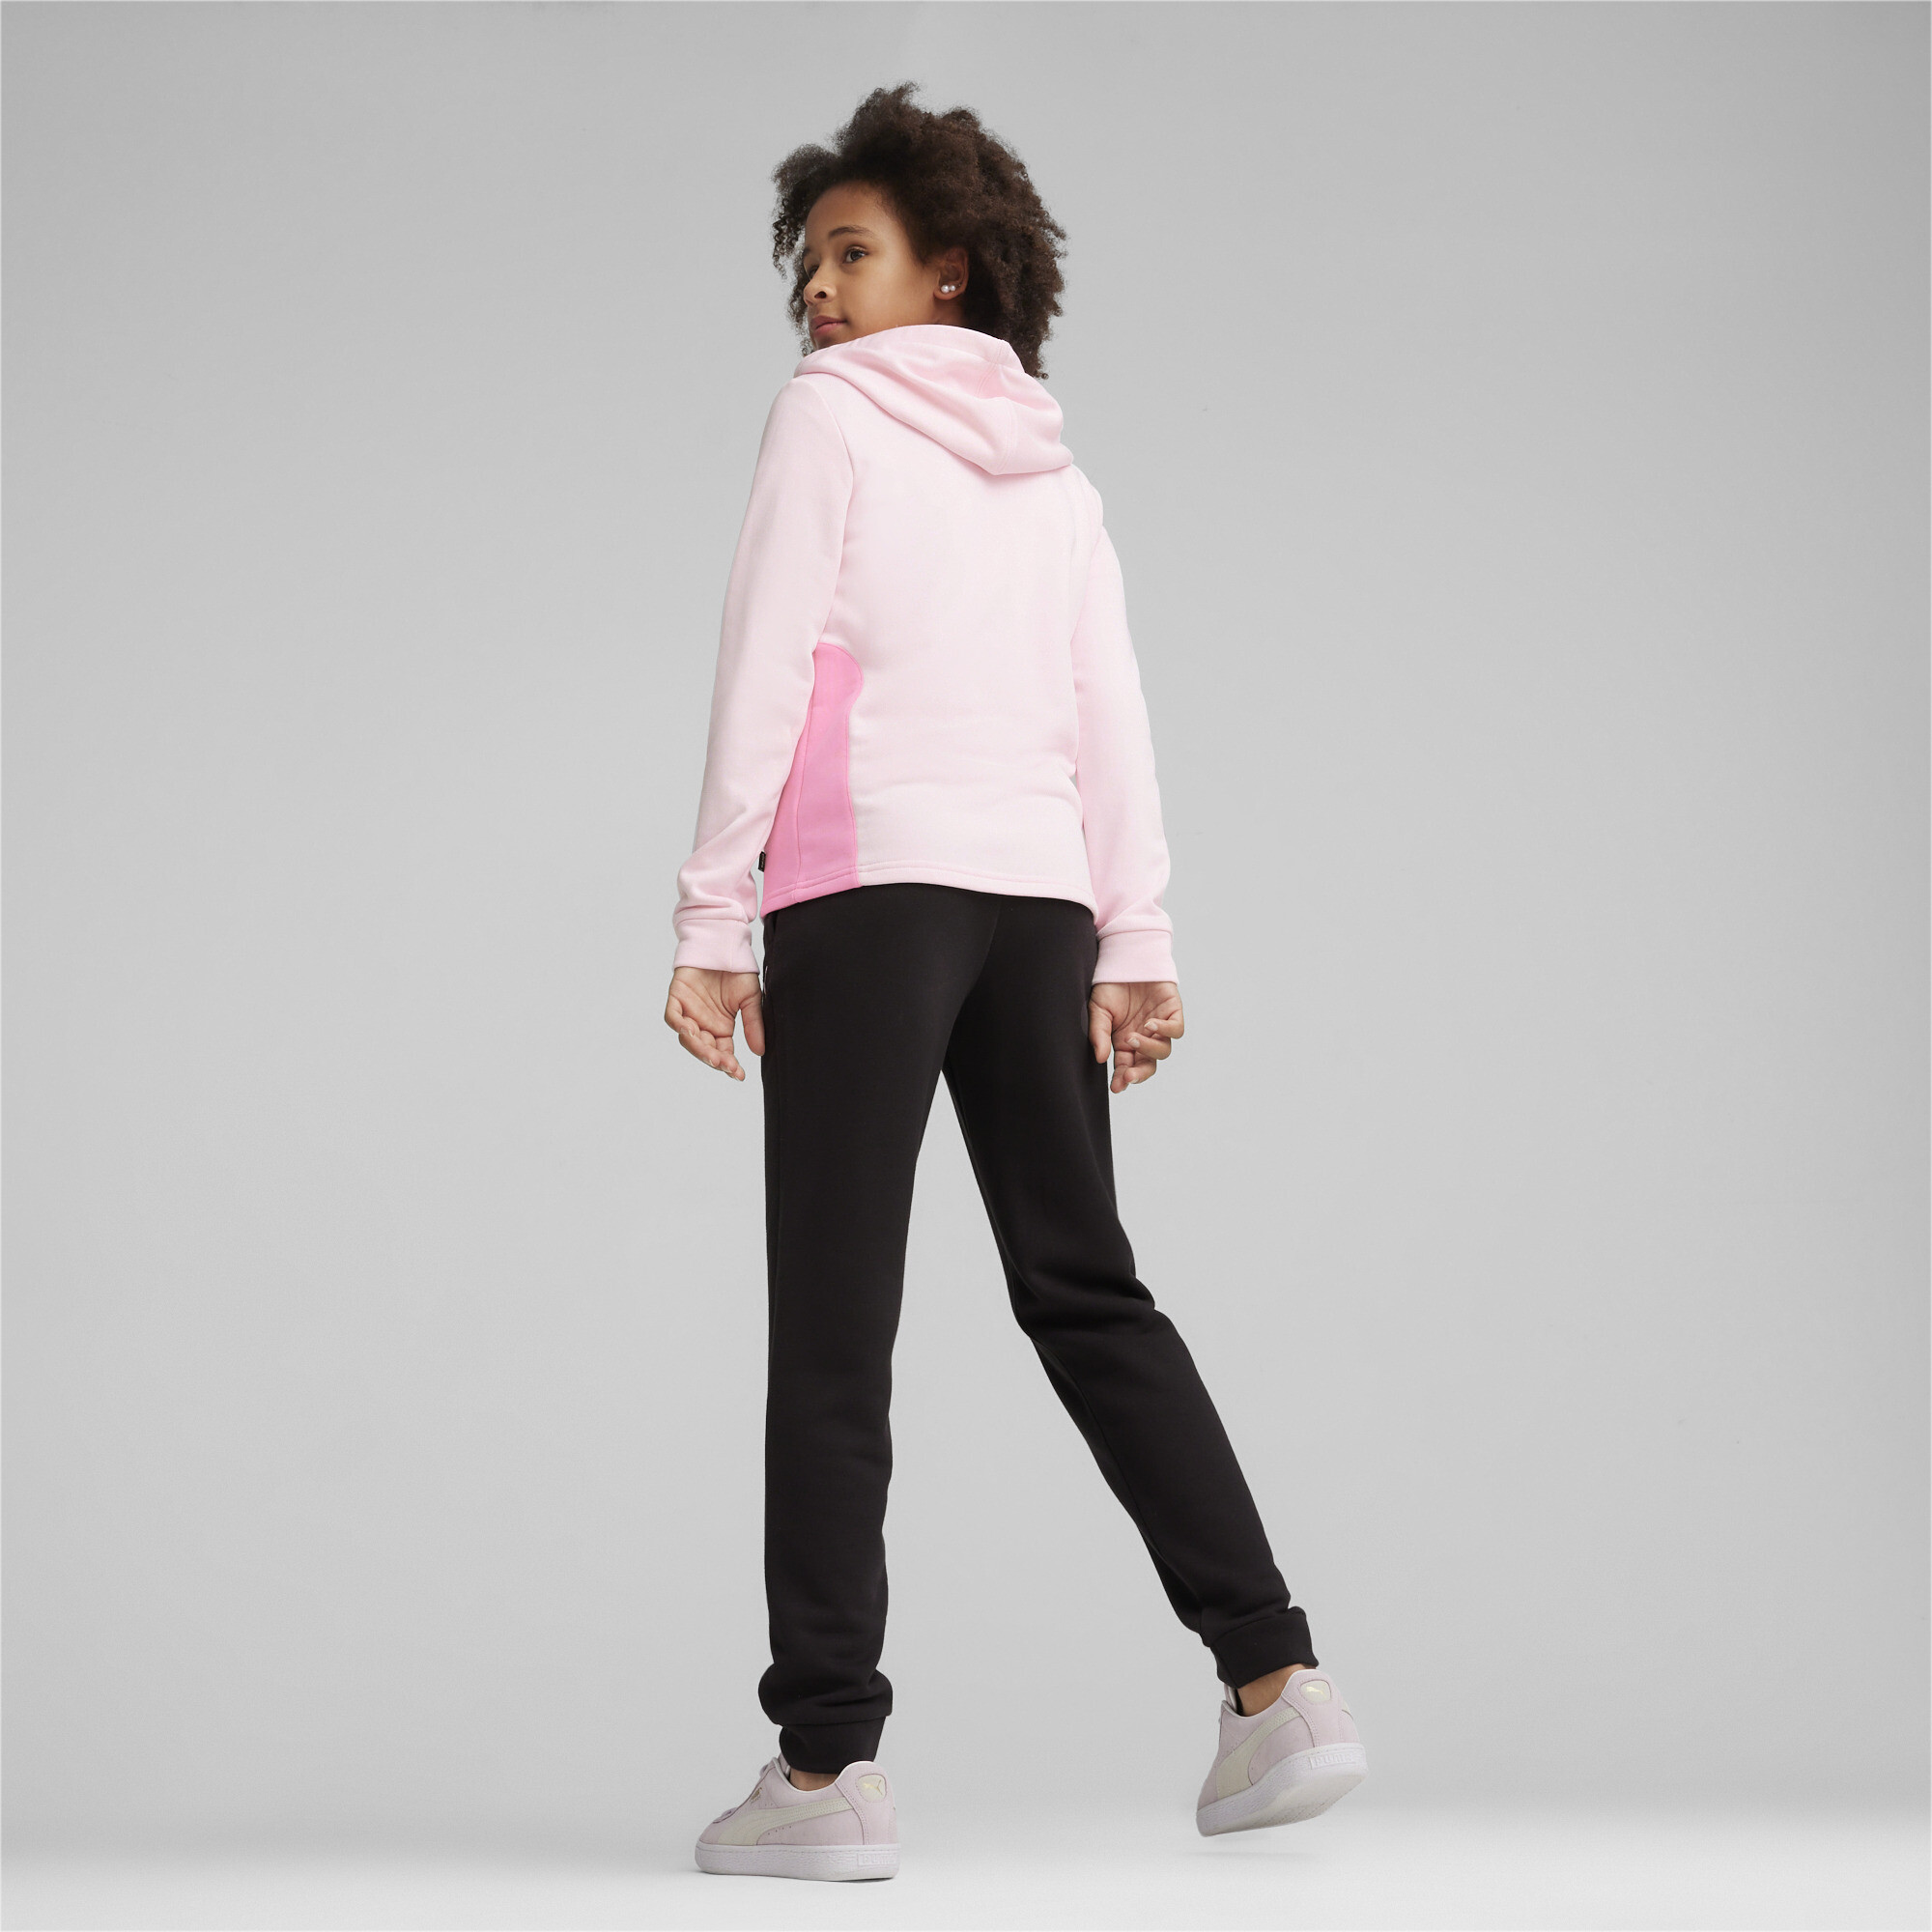 Women's Puma Hooded Sweatsuit Youth, Pink, Size 4-5Y, Clothing